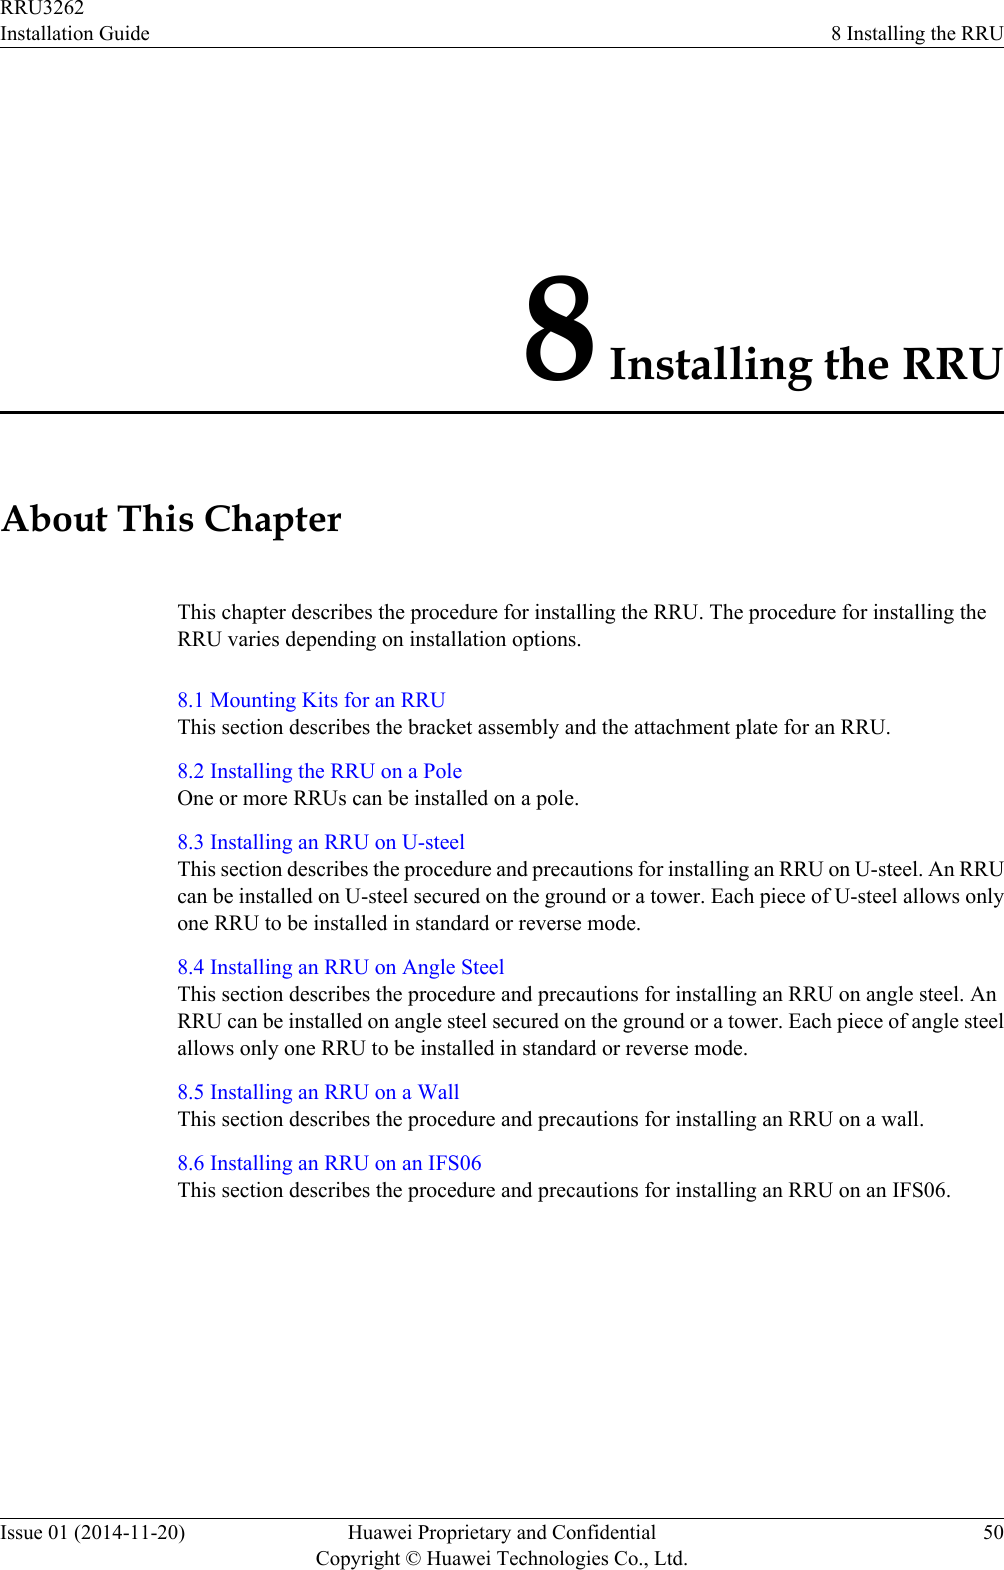 8 Installing the RRUAbout This ChapterThis chapter describes the procedure for installing the RRU. The procedure for installing theRRU varies depending on installation options.8.1 Mounting Kits for an RRUThis section describes the bracket assembly and the attachment plate for an RRU.8.2 Installing the RRU on a PoleOne or more RRUs can be installed on a pole.8.3 Installing an RRU on U-steelThis section describes the procedure and precautions for installing an RRU on U-steel. An RRUcan be installed on U-steel secured on the ground or a tower. Each piece of U-steel allows onlyone RRU to be installed in standard or reverse mode.8.4 Installing an RRU on Angle SteelThis section describes the procedure and precautions for installing an RRU on angle steel. AnRRU can be installed on angle steel secured on the ground or a tower. Each piece of angle steelallows only one RRU to be installed in standard or reverse mode.8.5 Installing an RRU on a WallThis section describes the procedure and precautions for installing an RRU on a wall.8.6 Installing an RRU on an IFS06This section describes the procedure and precautions for installing an RRU on an IFS06.RRU3262Installation Guide 8 Installing the RRUIssue 01 (2014-11-20) Huawei Proprietary and ConfidentialCopyright © Huawei Technologies Co., Ltd.50